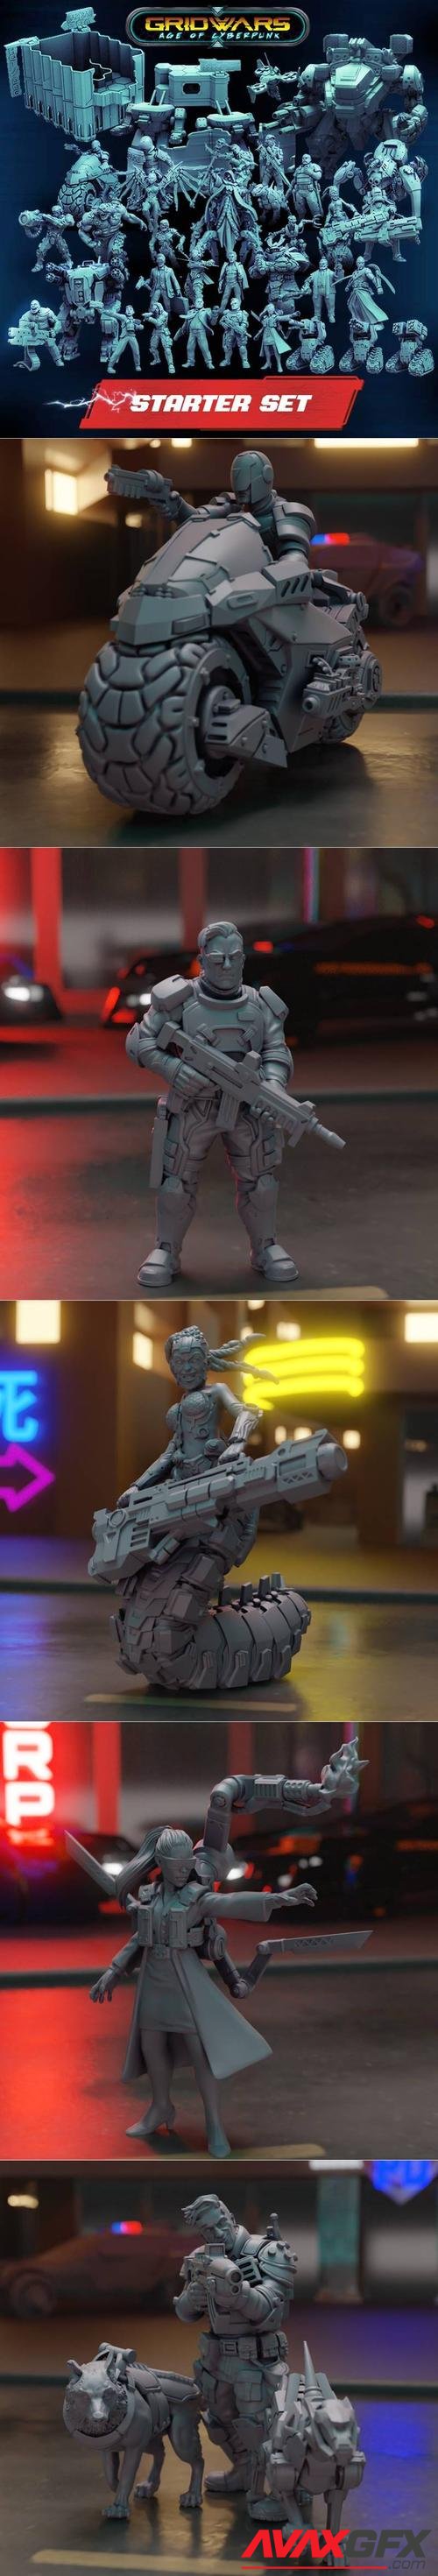 Gridwars Age of Cyberpunk - Cyber Forge – 3D Printable STL